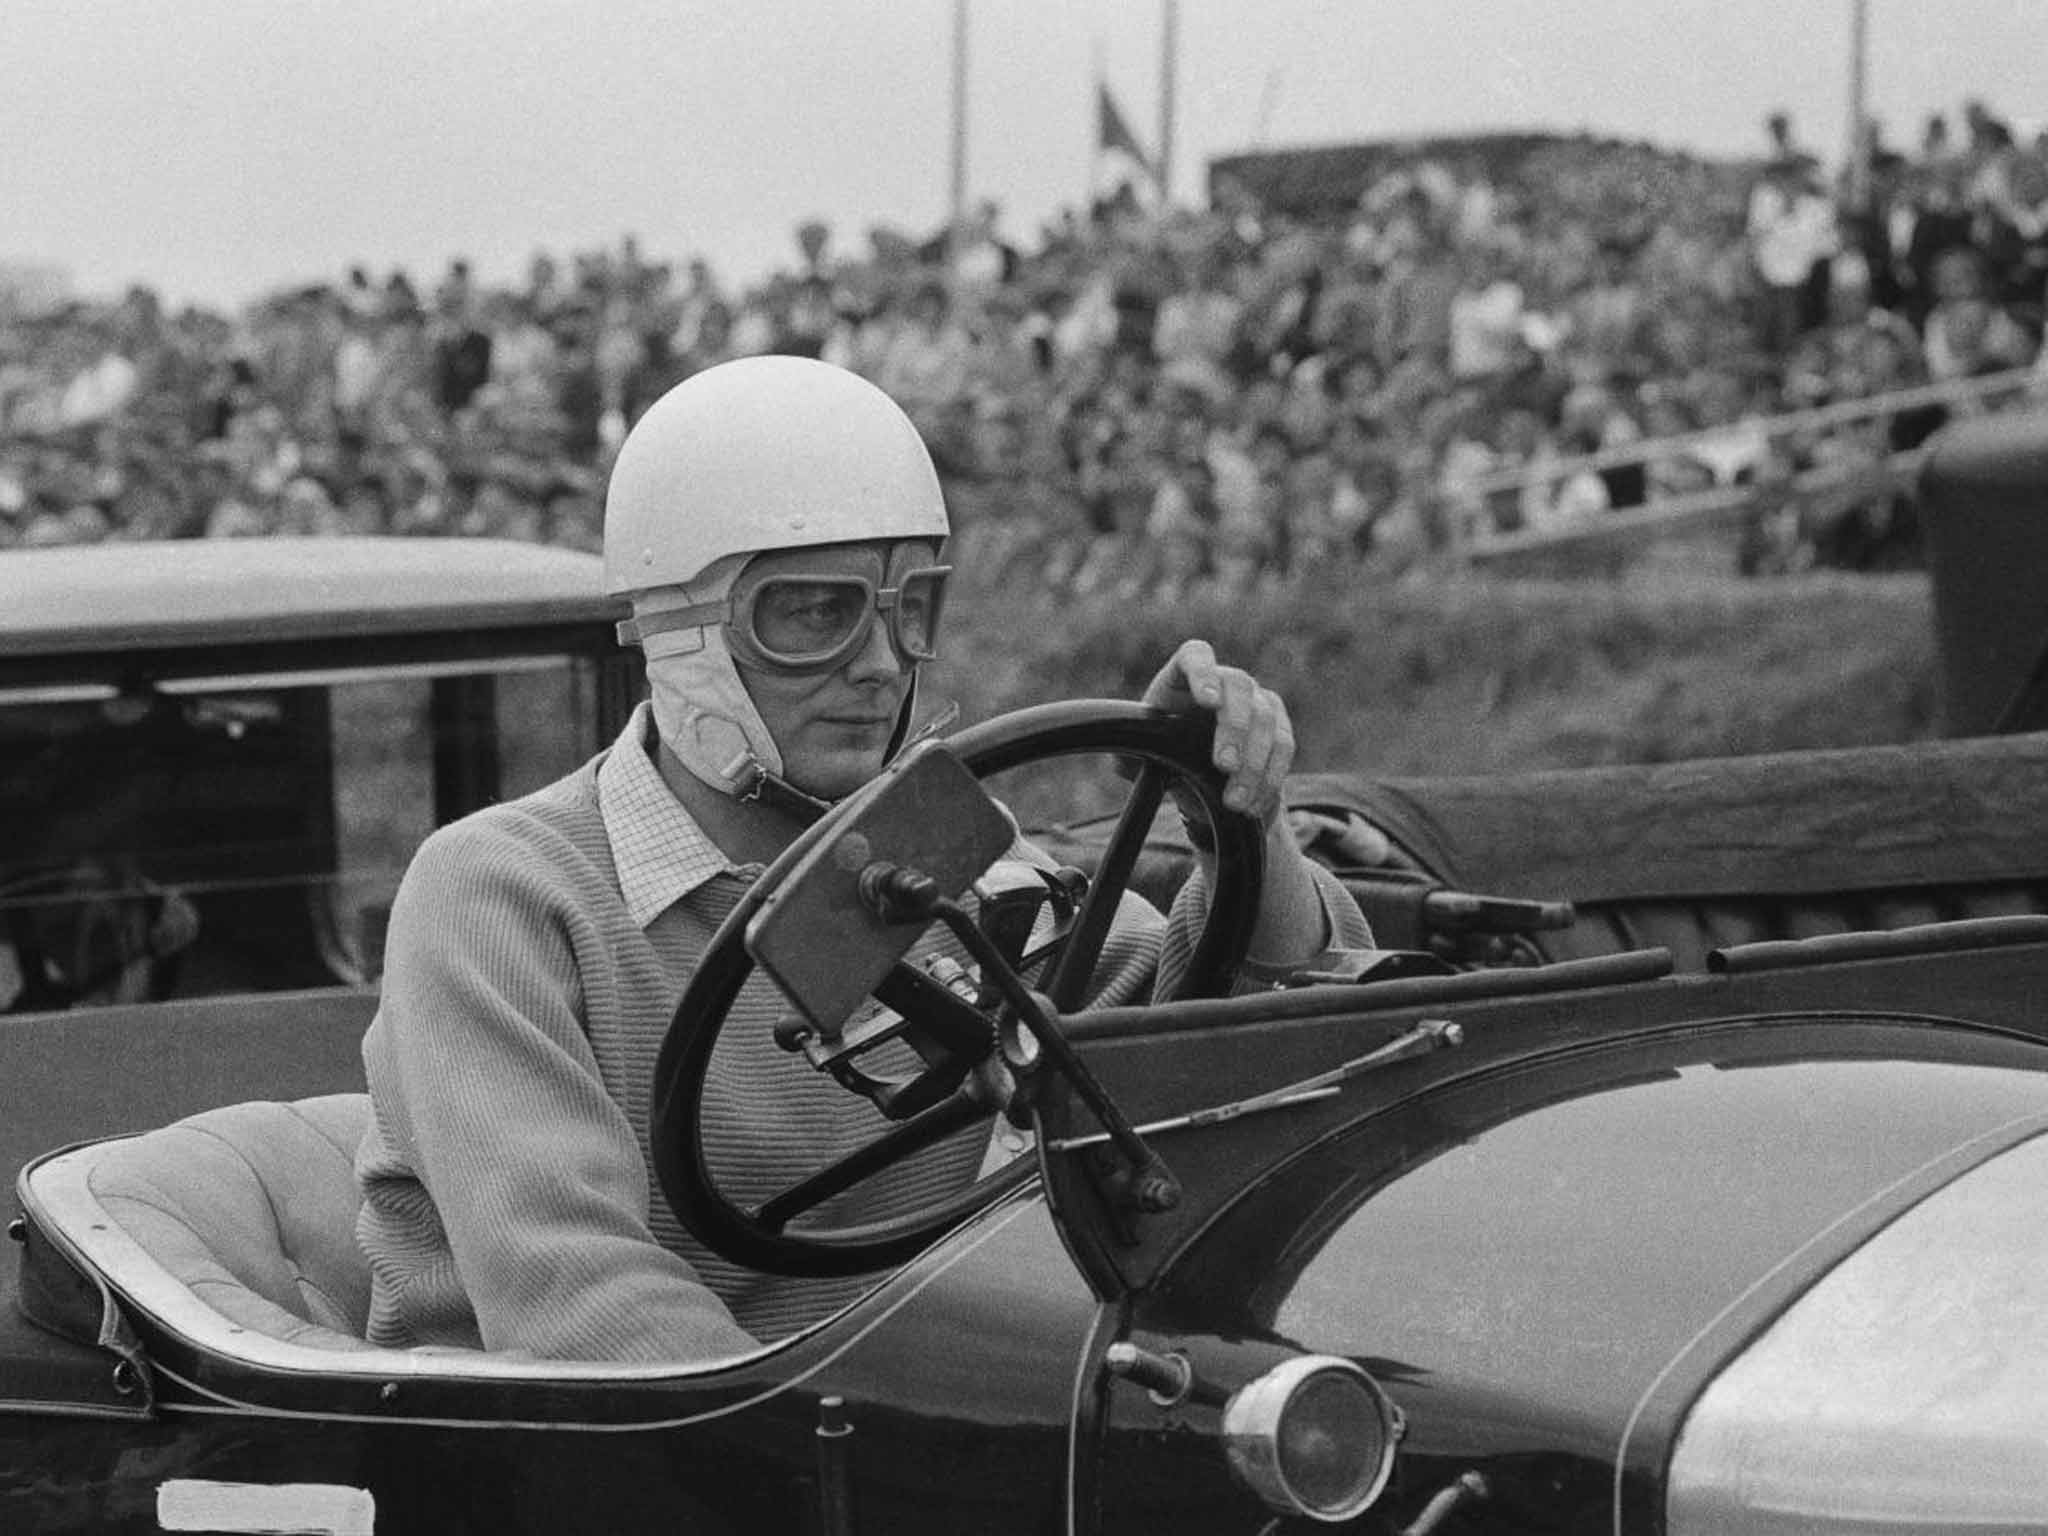 Montagu competes in a veteran car race at Brands Hatch in 1958; he won in his 1914 Vauxhall